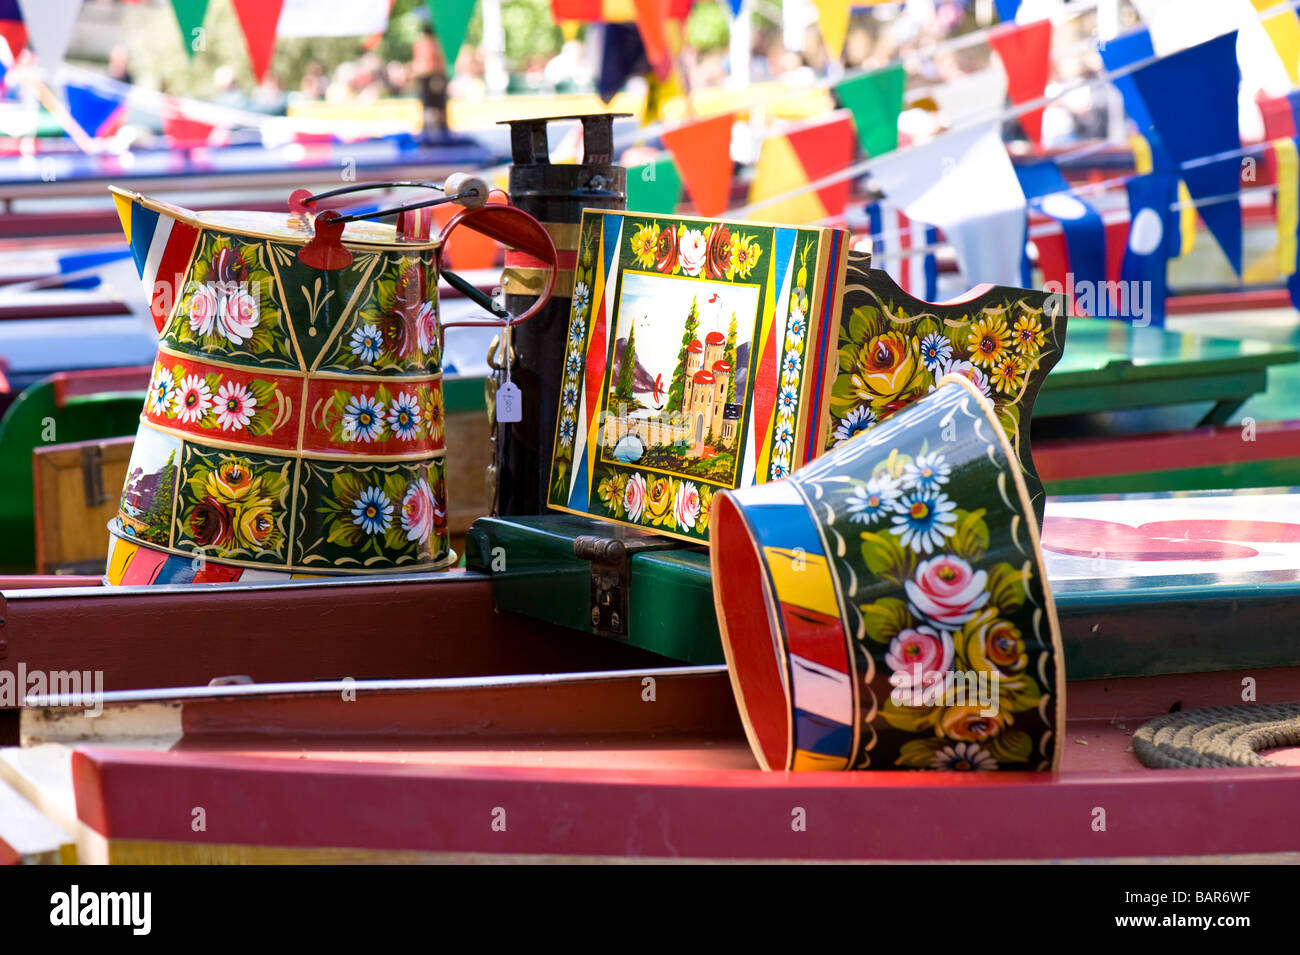 Decorated narrow boats moored on Regents Canal in 'Little Venice' during Canalway Cavalcade, London, United Kingdom Stock Photo